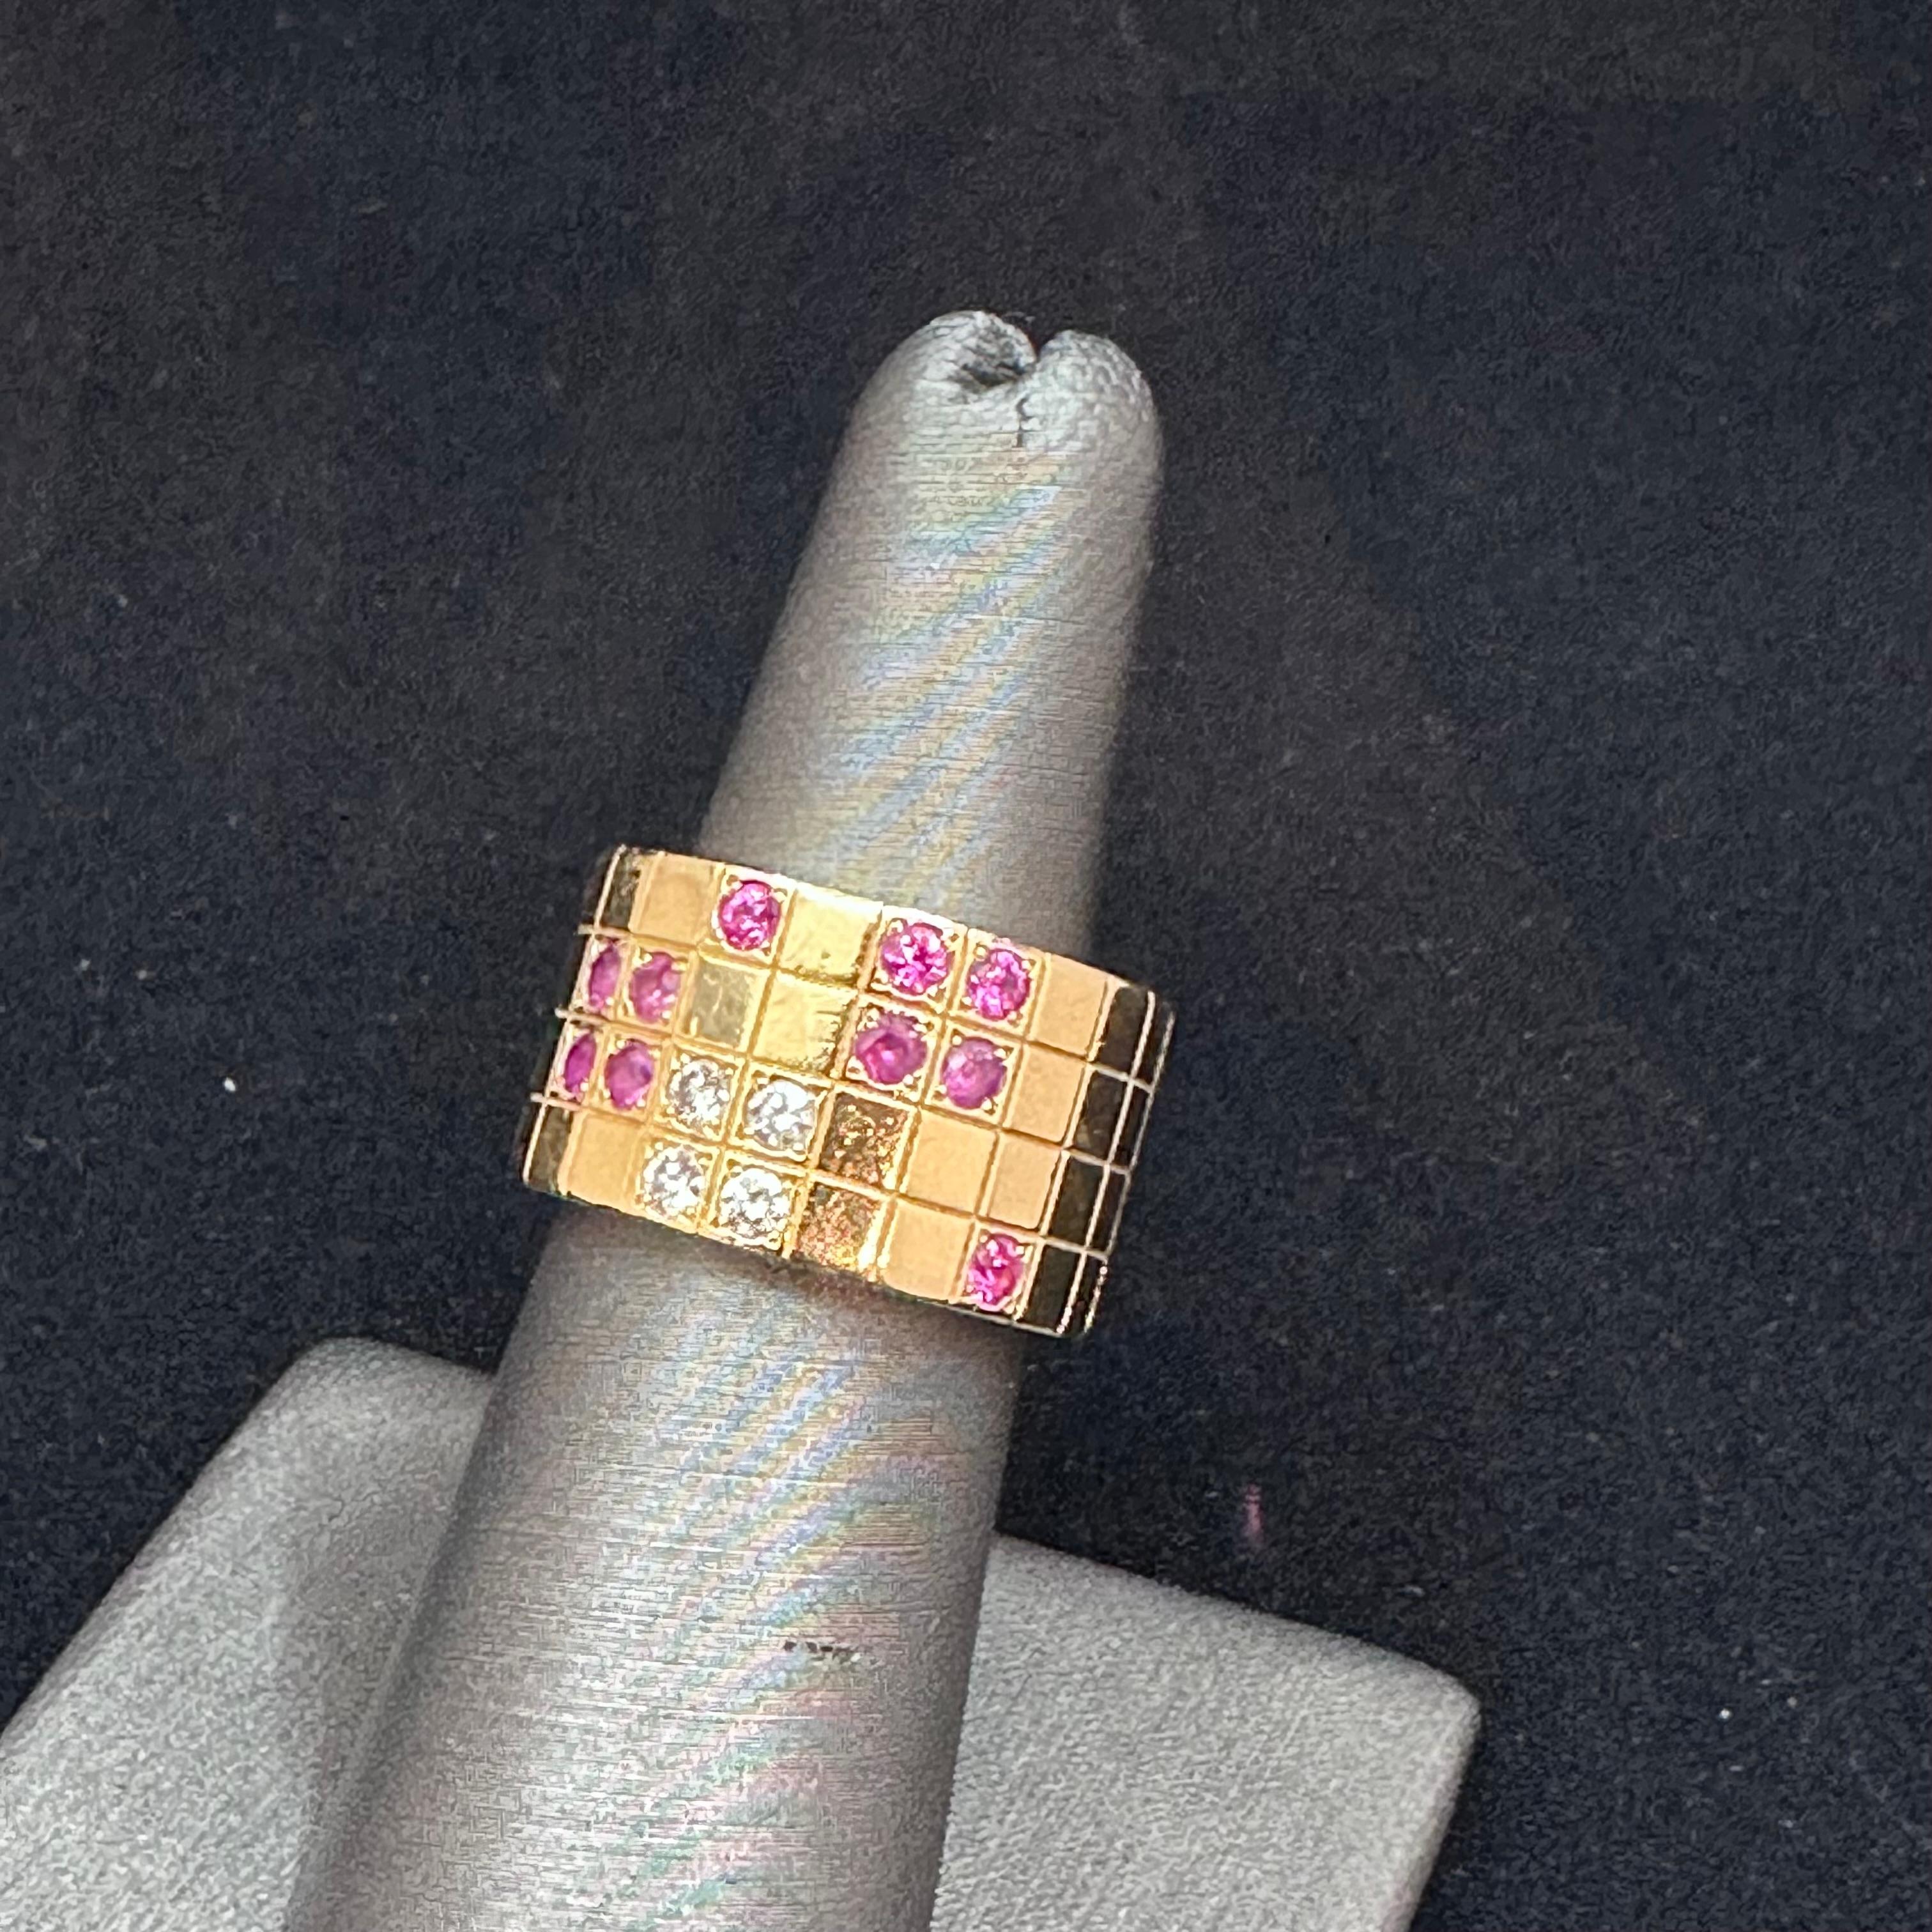 Cartier Lanieres Sapphire Diamond Rose Gold Ring. A remarkable piece showcases Cartier's remarkable craftsmanship from the Lanieres collection in Pink Sapphire and Diamond. 
Expertly crafted from 18k rose gold, it features a wide band
14 mm width